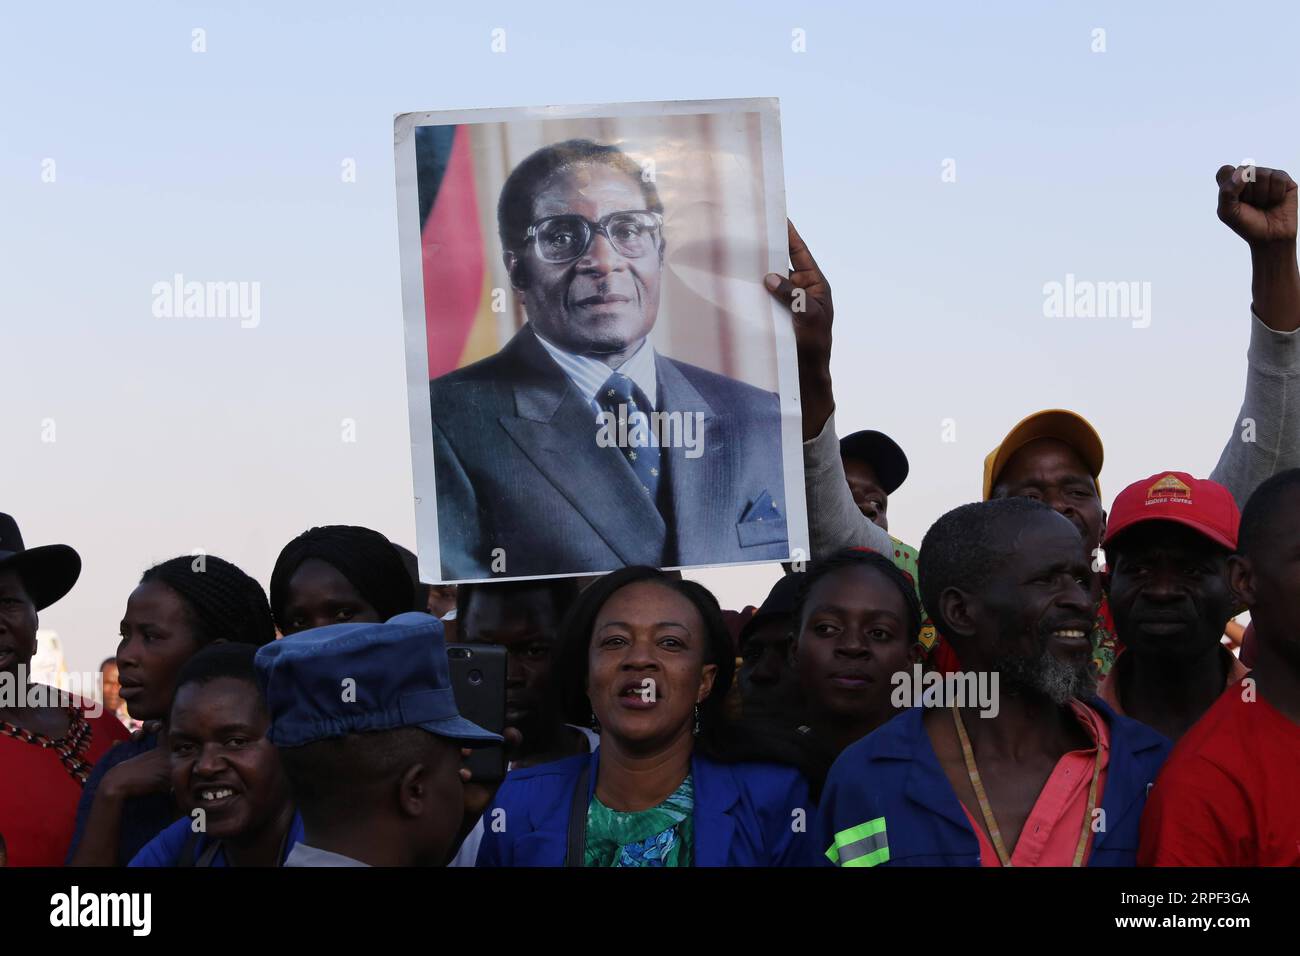 Leichnam von langjährigem Präsidenten Robert Mugabe in Simbabwe angekommen (190911) -- HARARE, Sept. 11, 2019 (Xinhua) -- Zimbabweans receive the body of the late former Zimbabwean President Robert Mugabe at the Robert Gabriel Mugabe International Airport in Harare, Zimbabwe, on Sept. 11, 2019. The body of the late former Zimbabwean President Robert Mugabe, who died in Singapore last Friday aged 95, arrived in the country on Wednesday afternoon ahead of his burial planned for Sunday. (Xinhua/Chen Yaqin) ZIMBABWE-HARARE-MUGABE-BODY-ARRIVAL PUBLICATIONxNOTxINxCHN Stock Photo